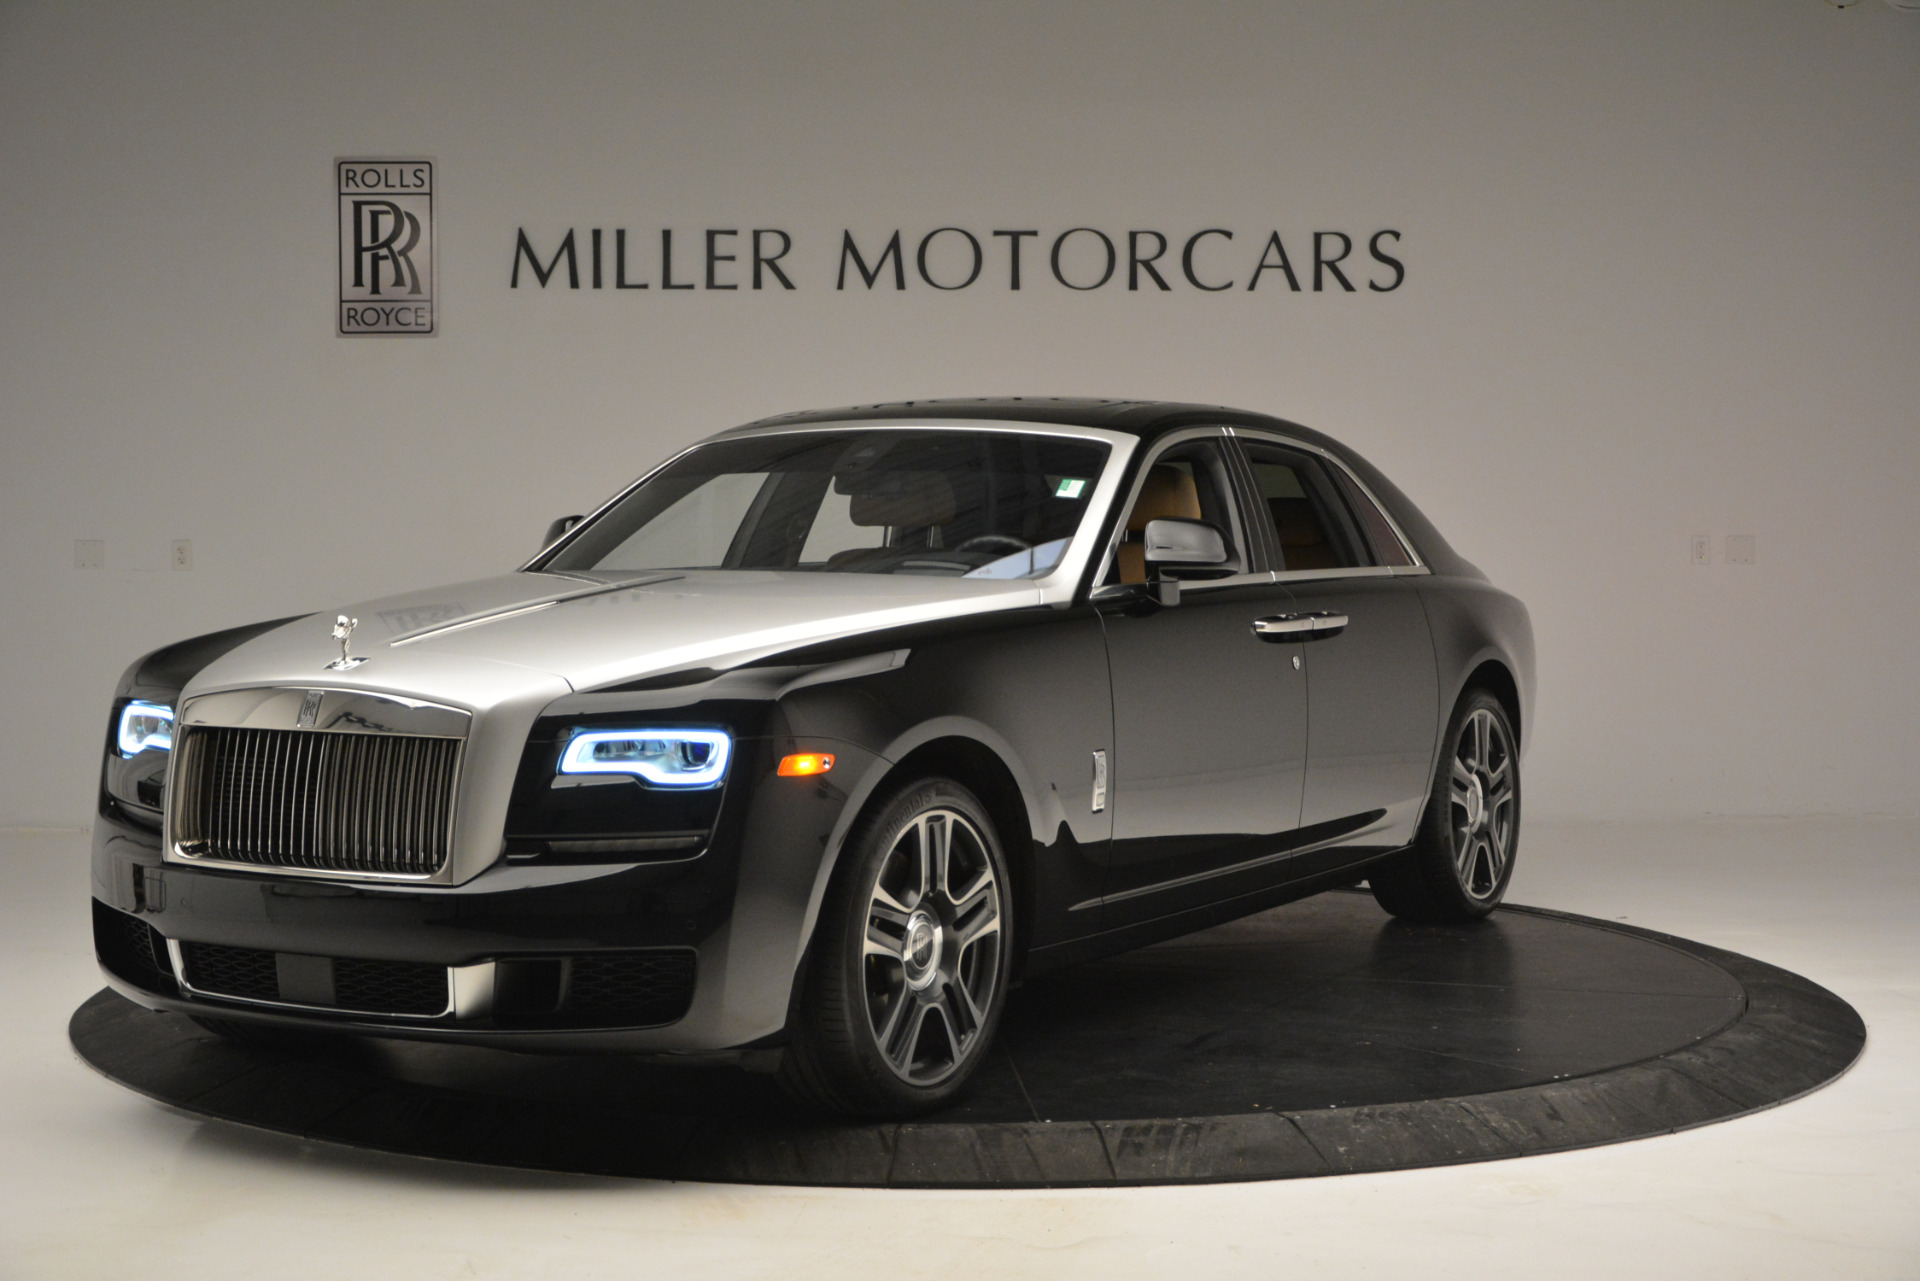 PreOwned 2018 RollsRoyce Ghost For Sale () Miller Motorcars Stock R481A